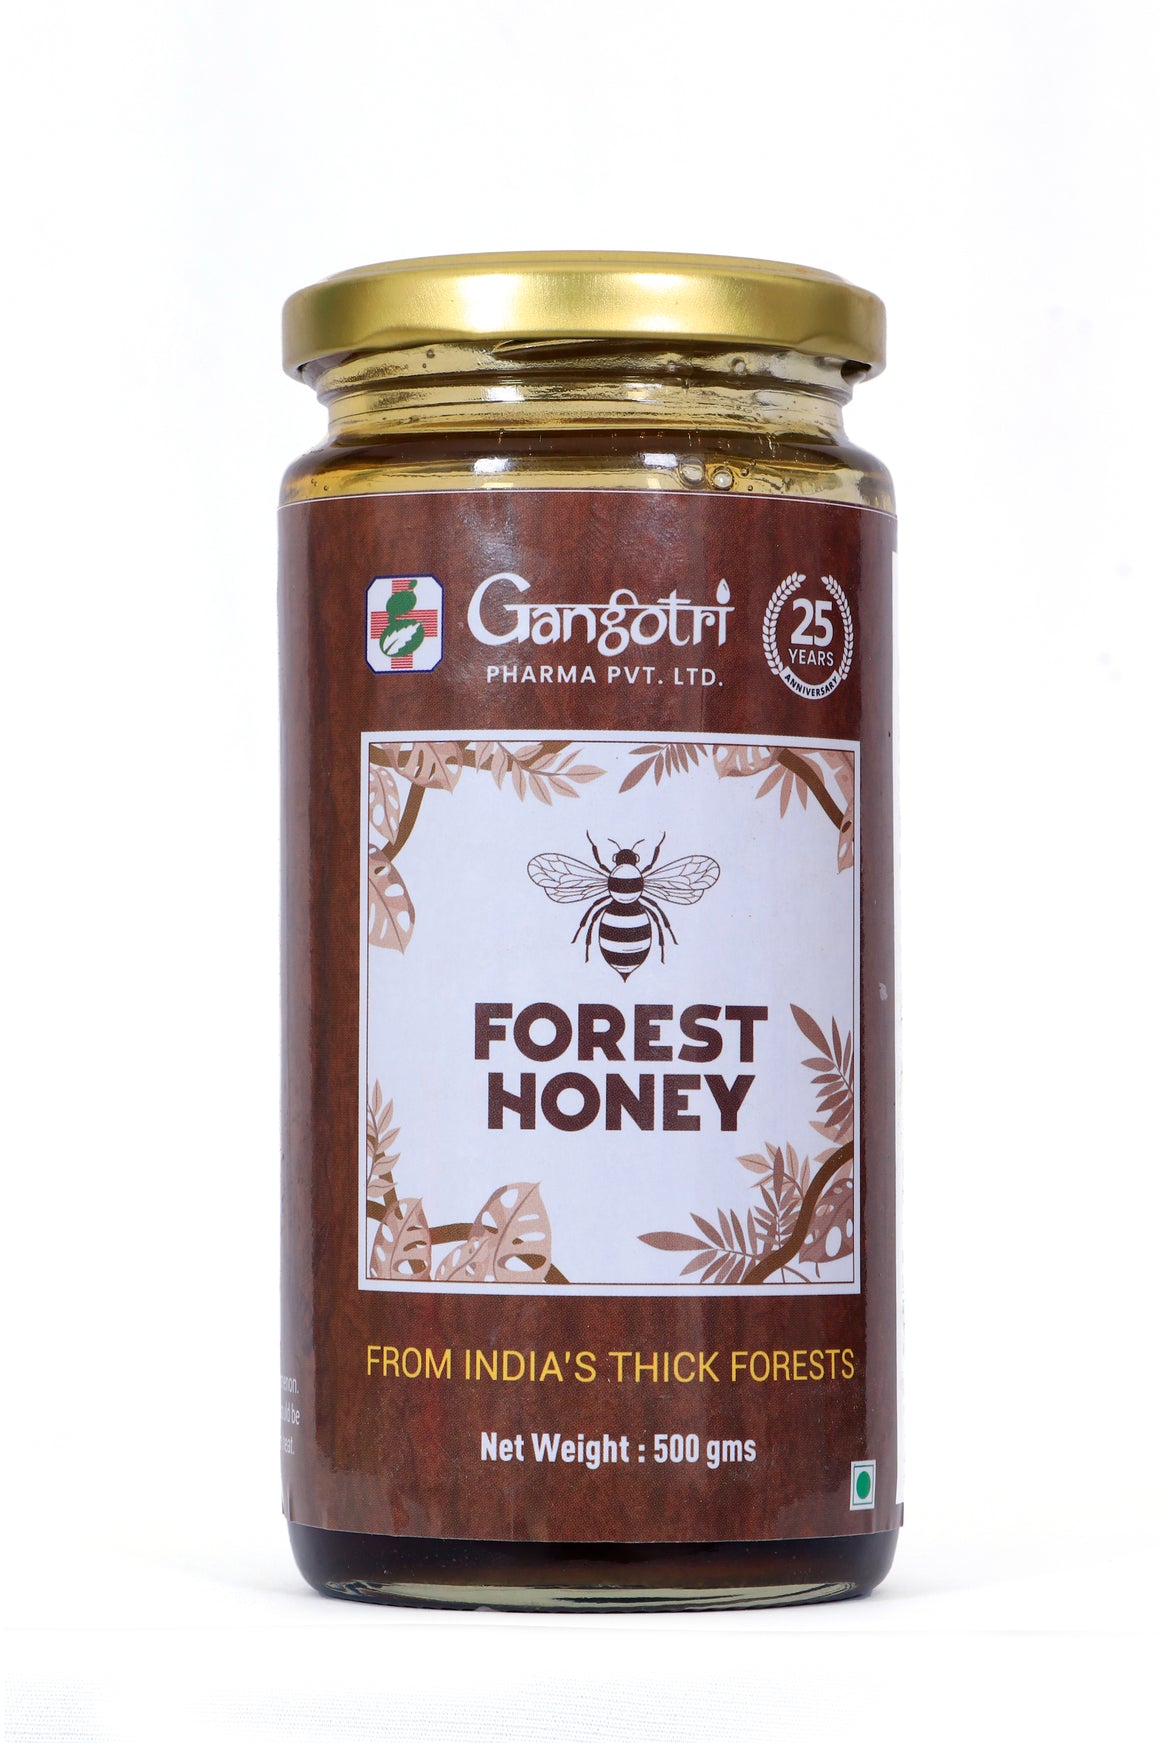 Forest Honey - Pure, Natural, and Loaded with Health Benefits